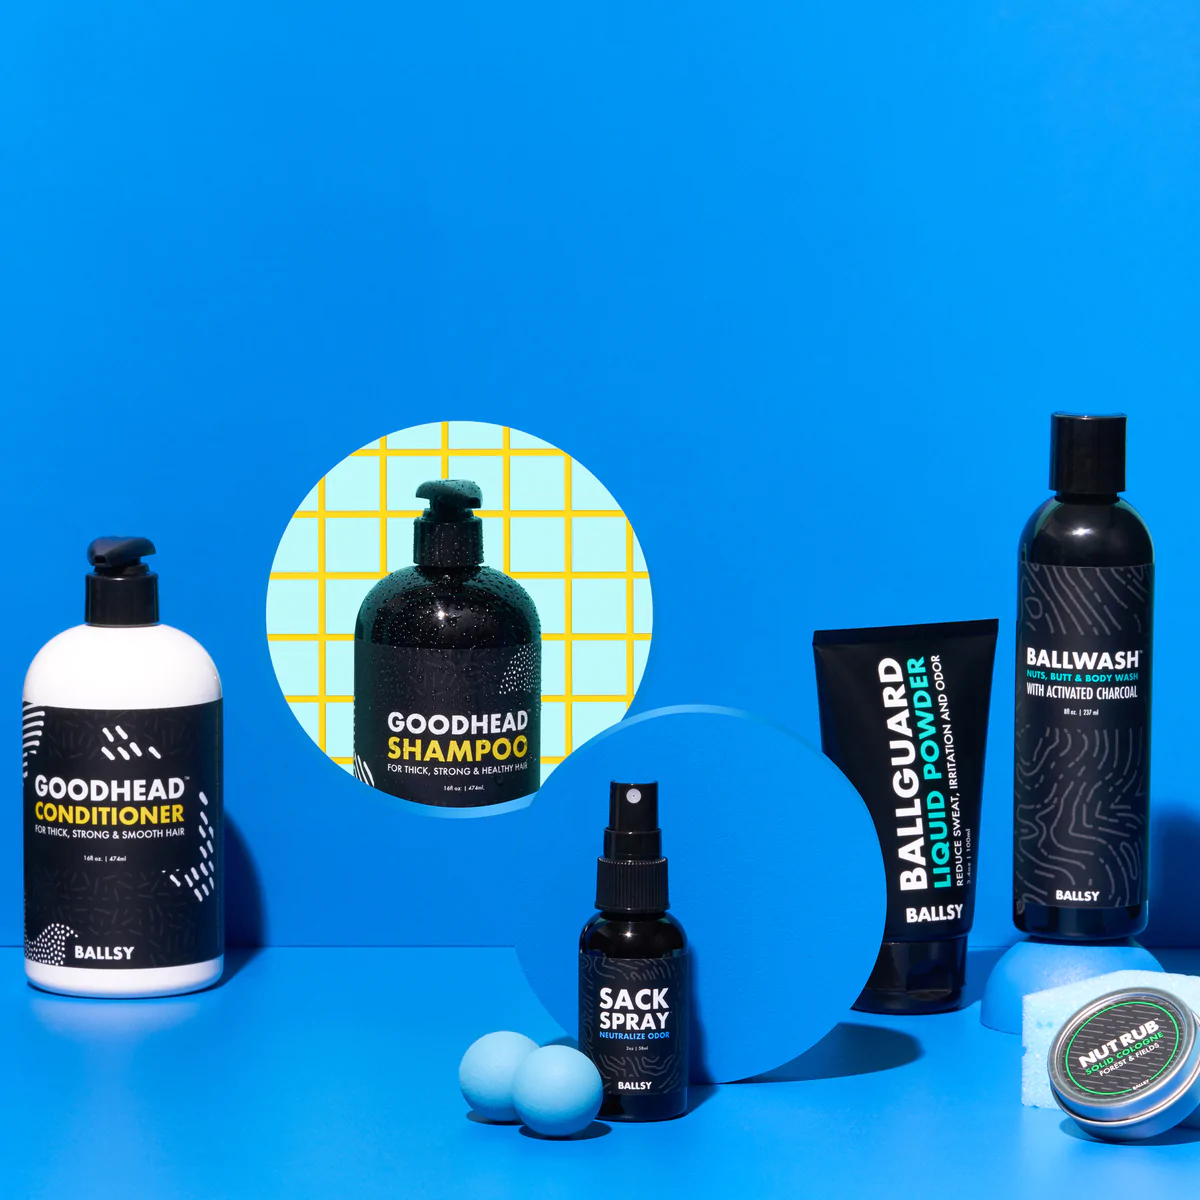 An array of personal care items from Ballsy displayed against a blue background.